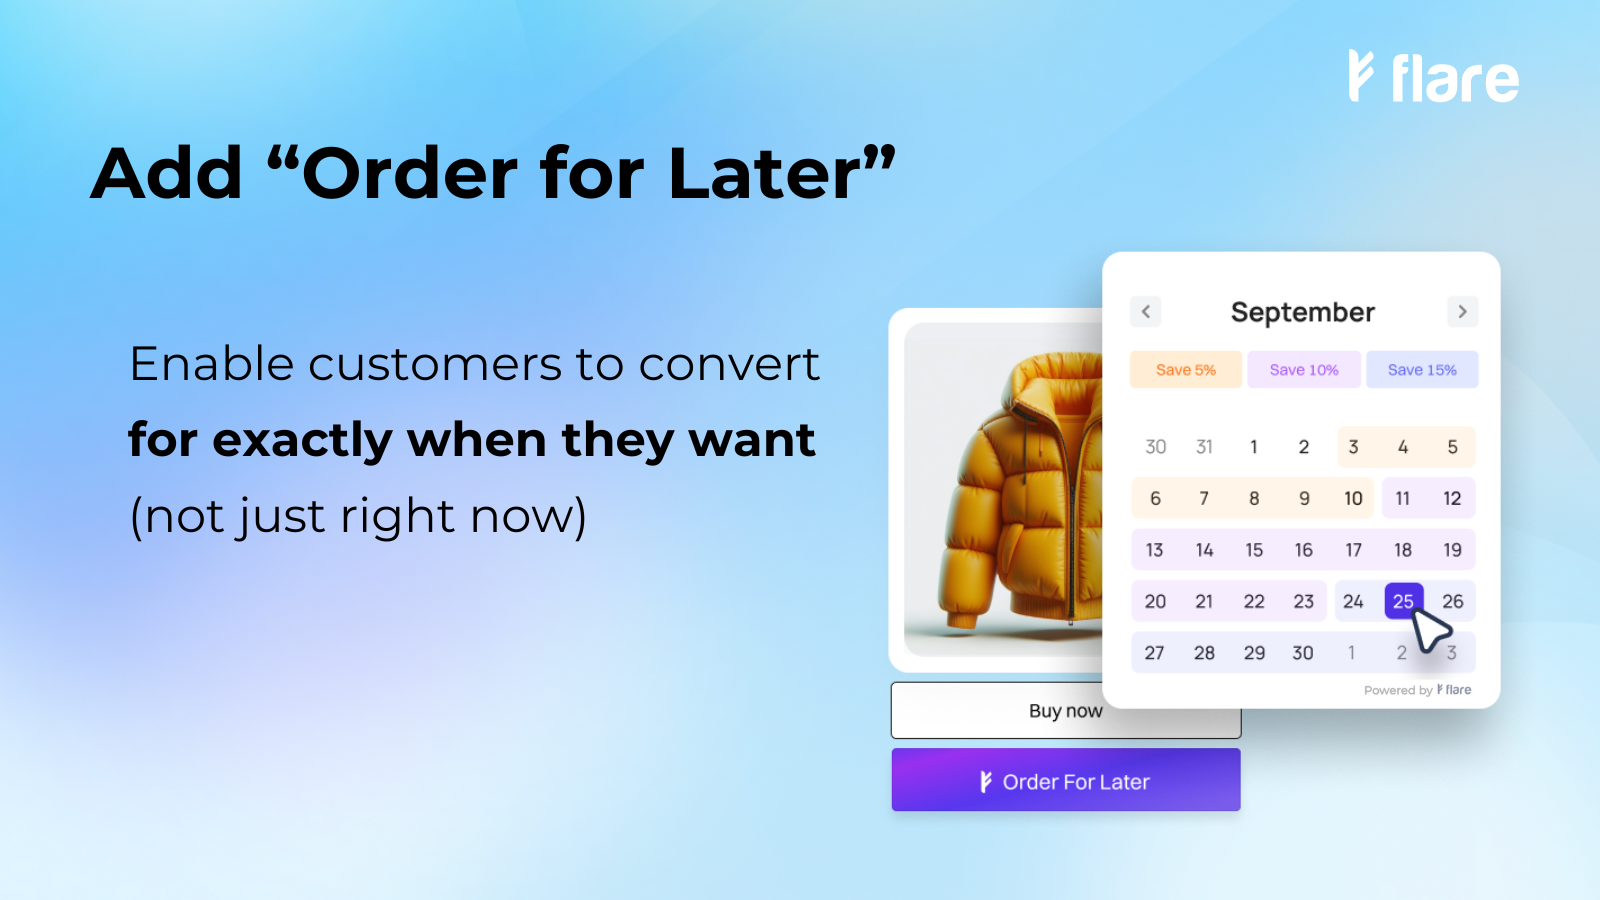 Add "Order for Later"